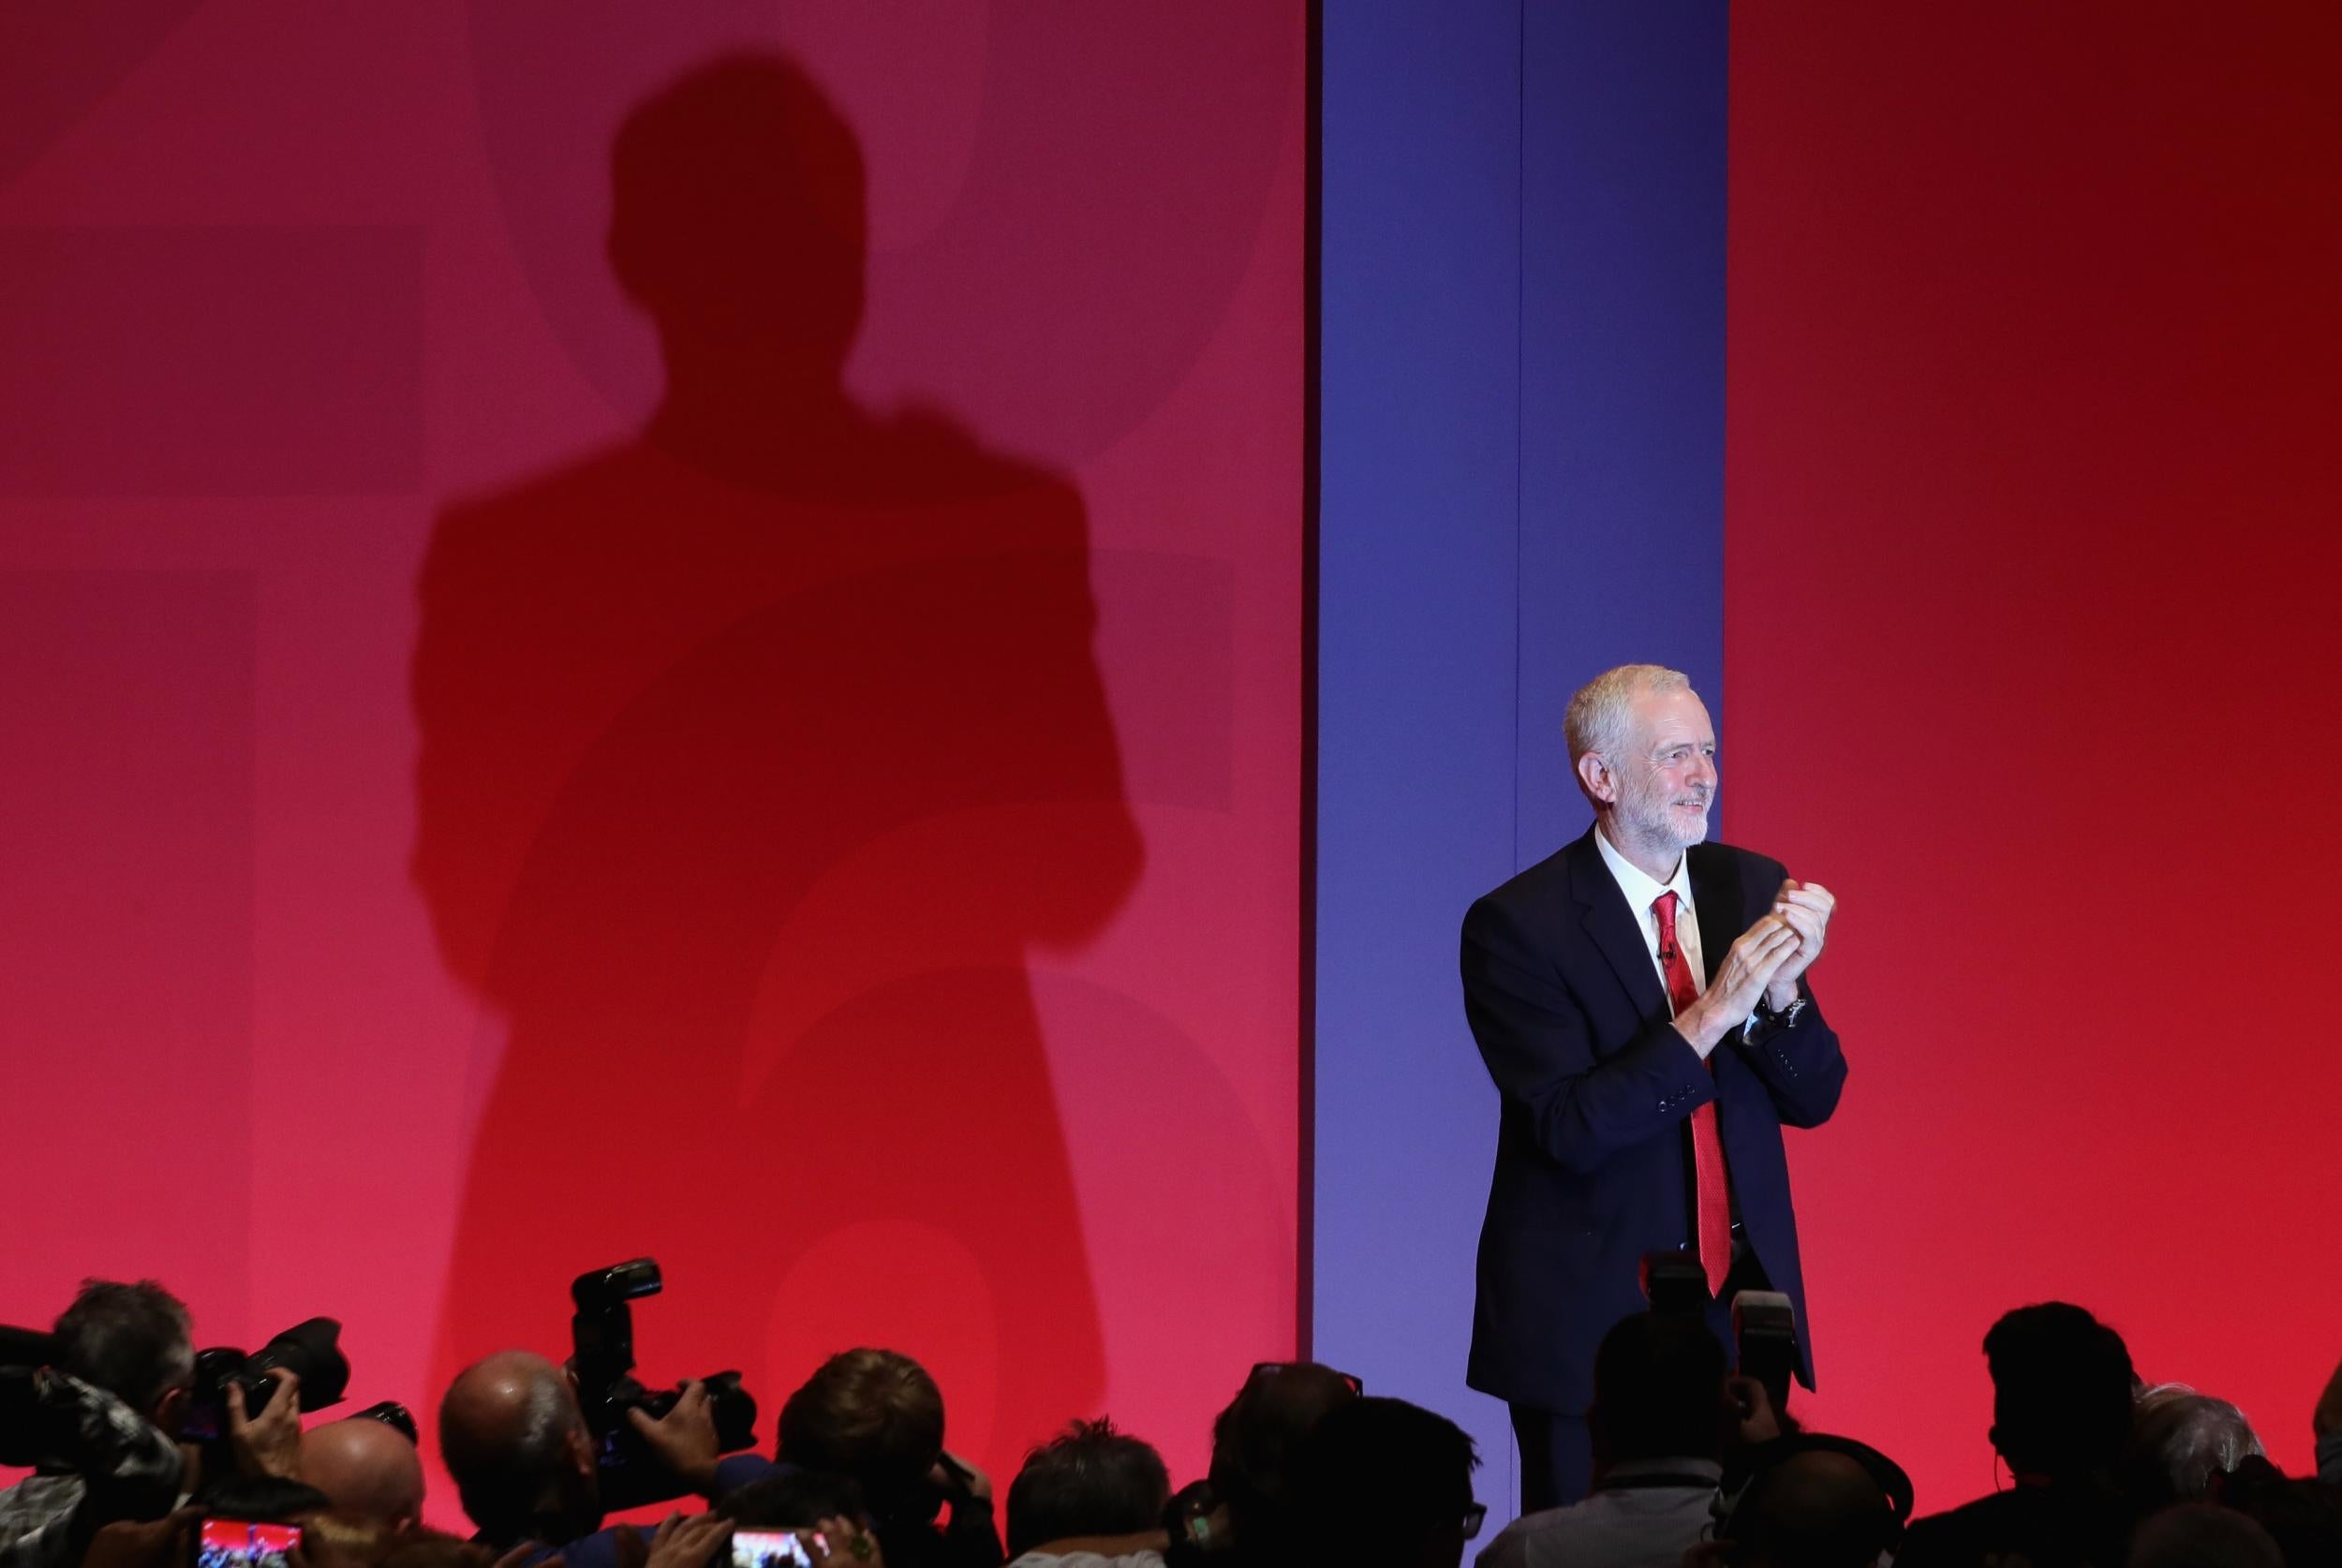 Jeremy Corbyn said recent policy announcements meant Labour offered a ‘clear and credible choice for the country’